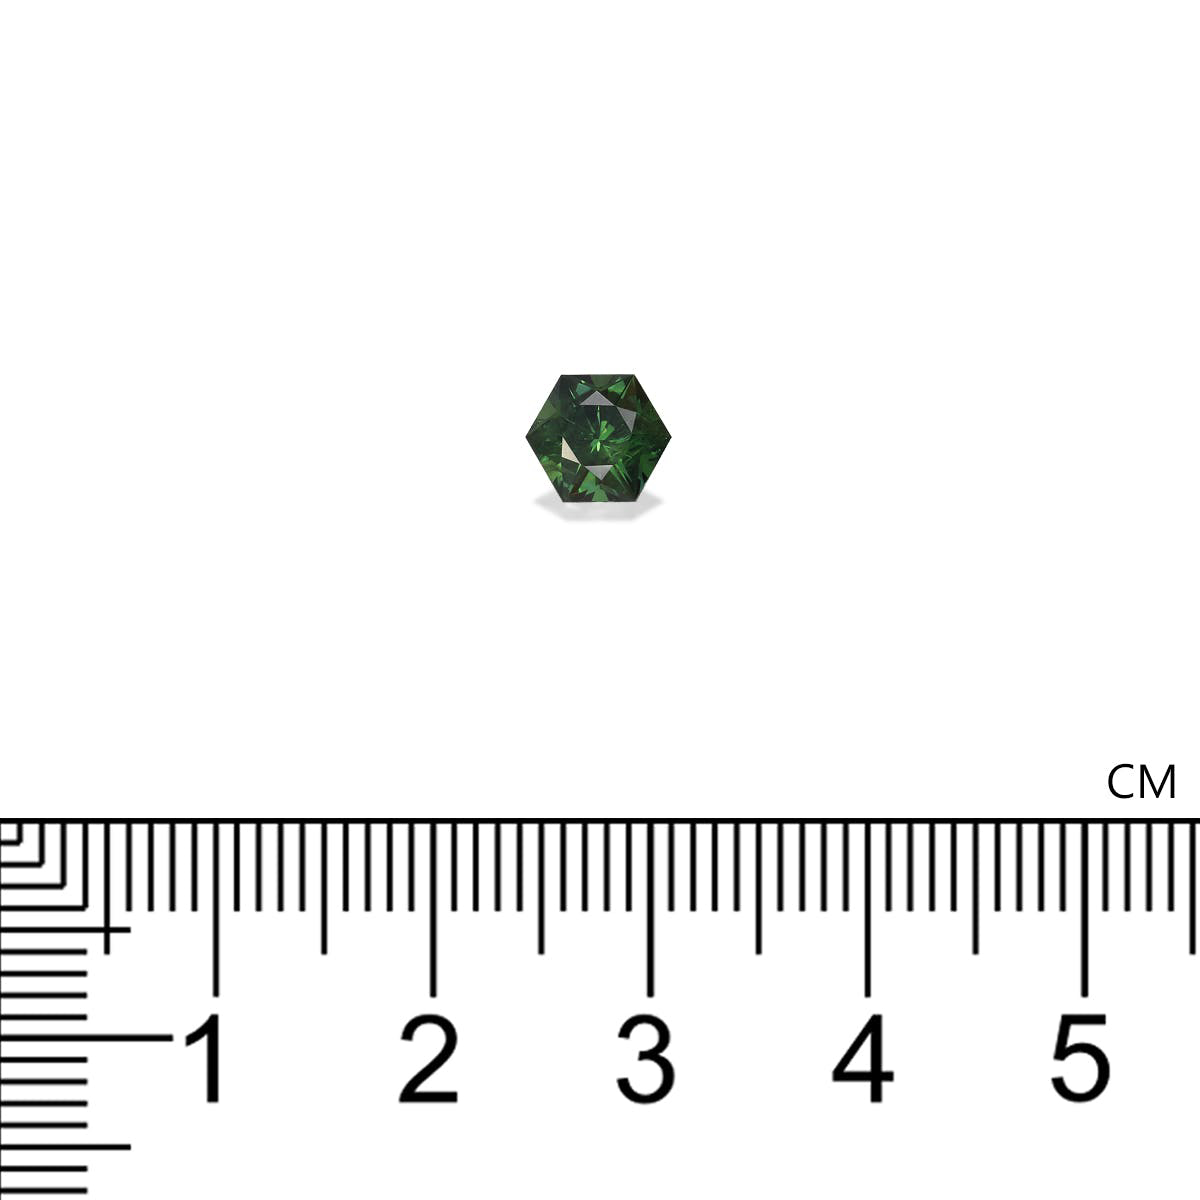 Picture of Green Teal Sapphire 1.15ct - 6mm (TL0043)